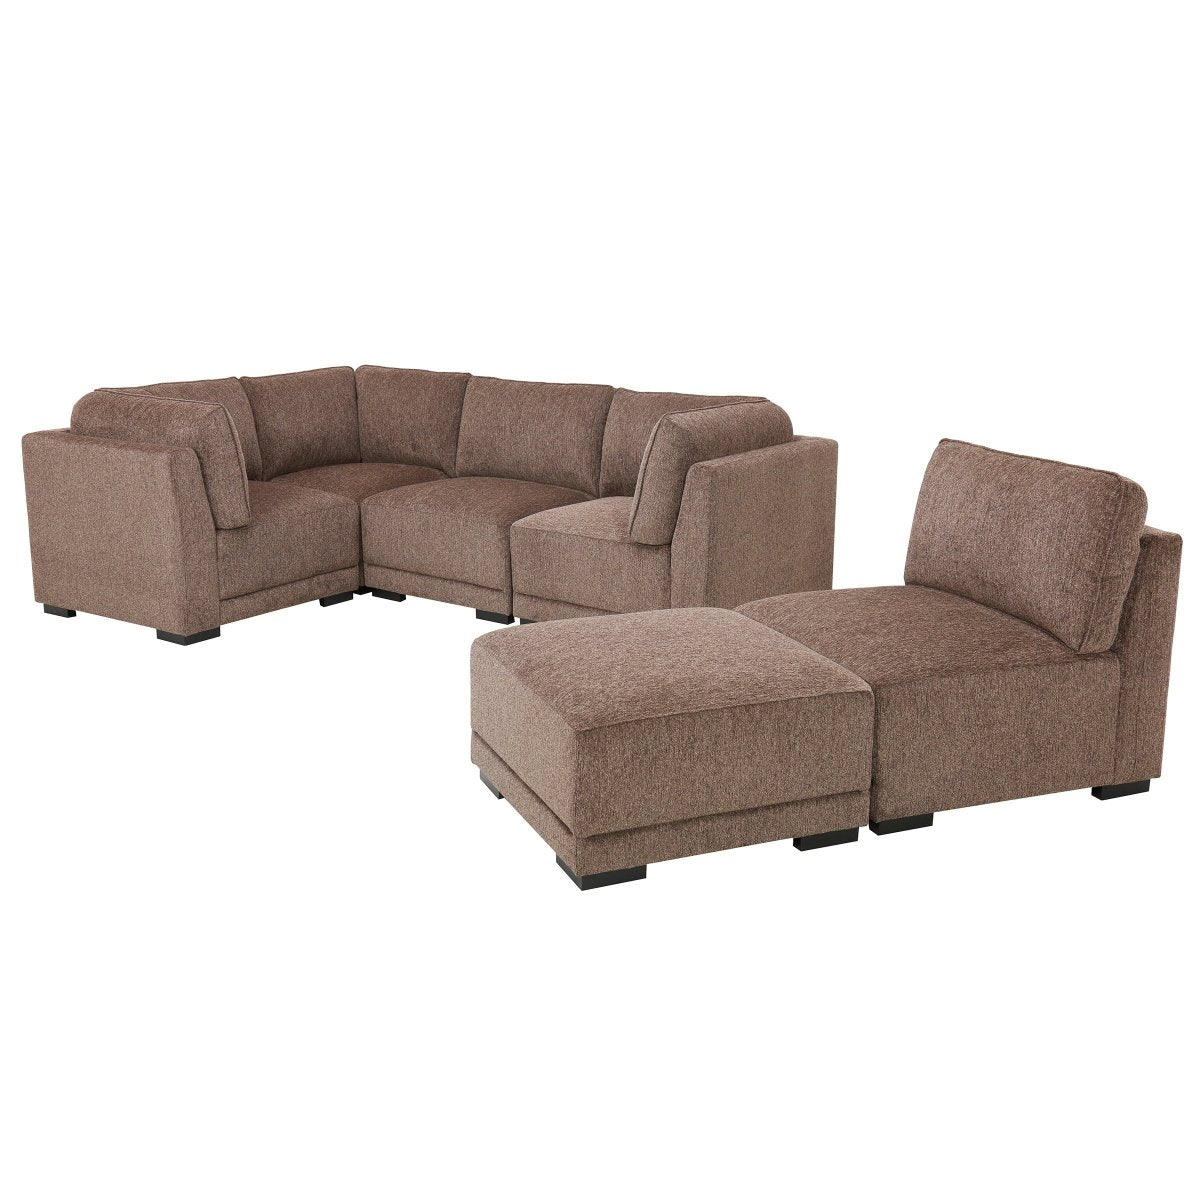 Belize Fabric Modular Sectional - Alpine Outlets